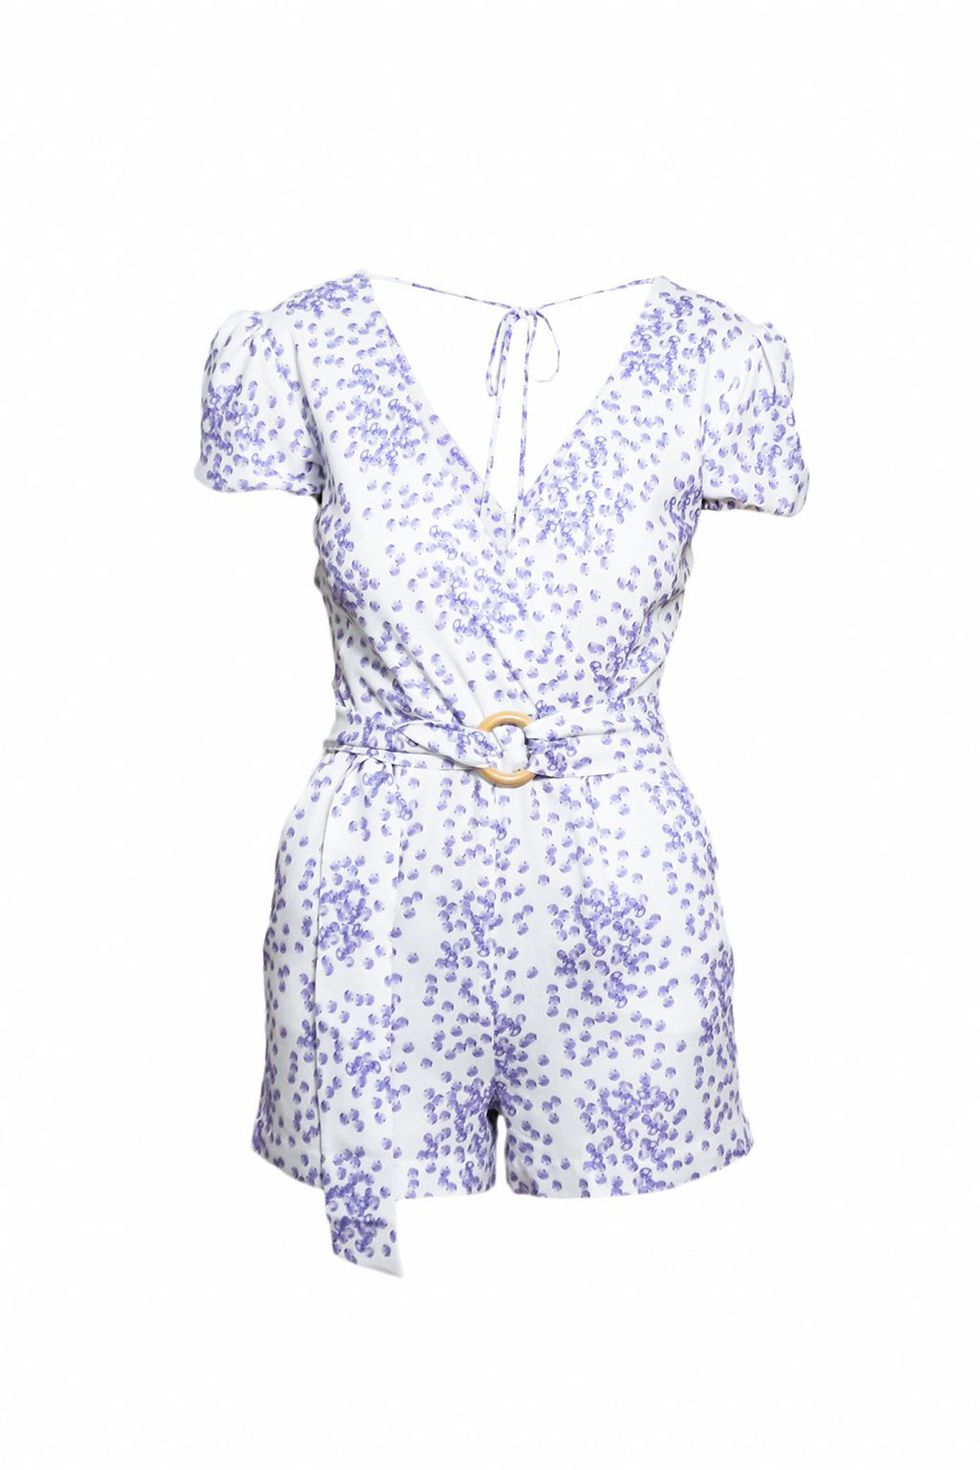 Clothing, White, Day dress, Dress, Purple, Sleeve, Cocktail dress, One-piece garment, Cover-up, 